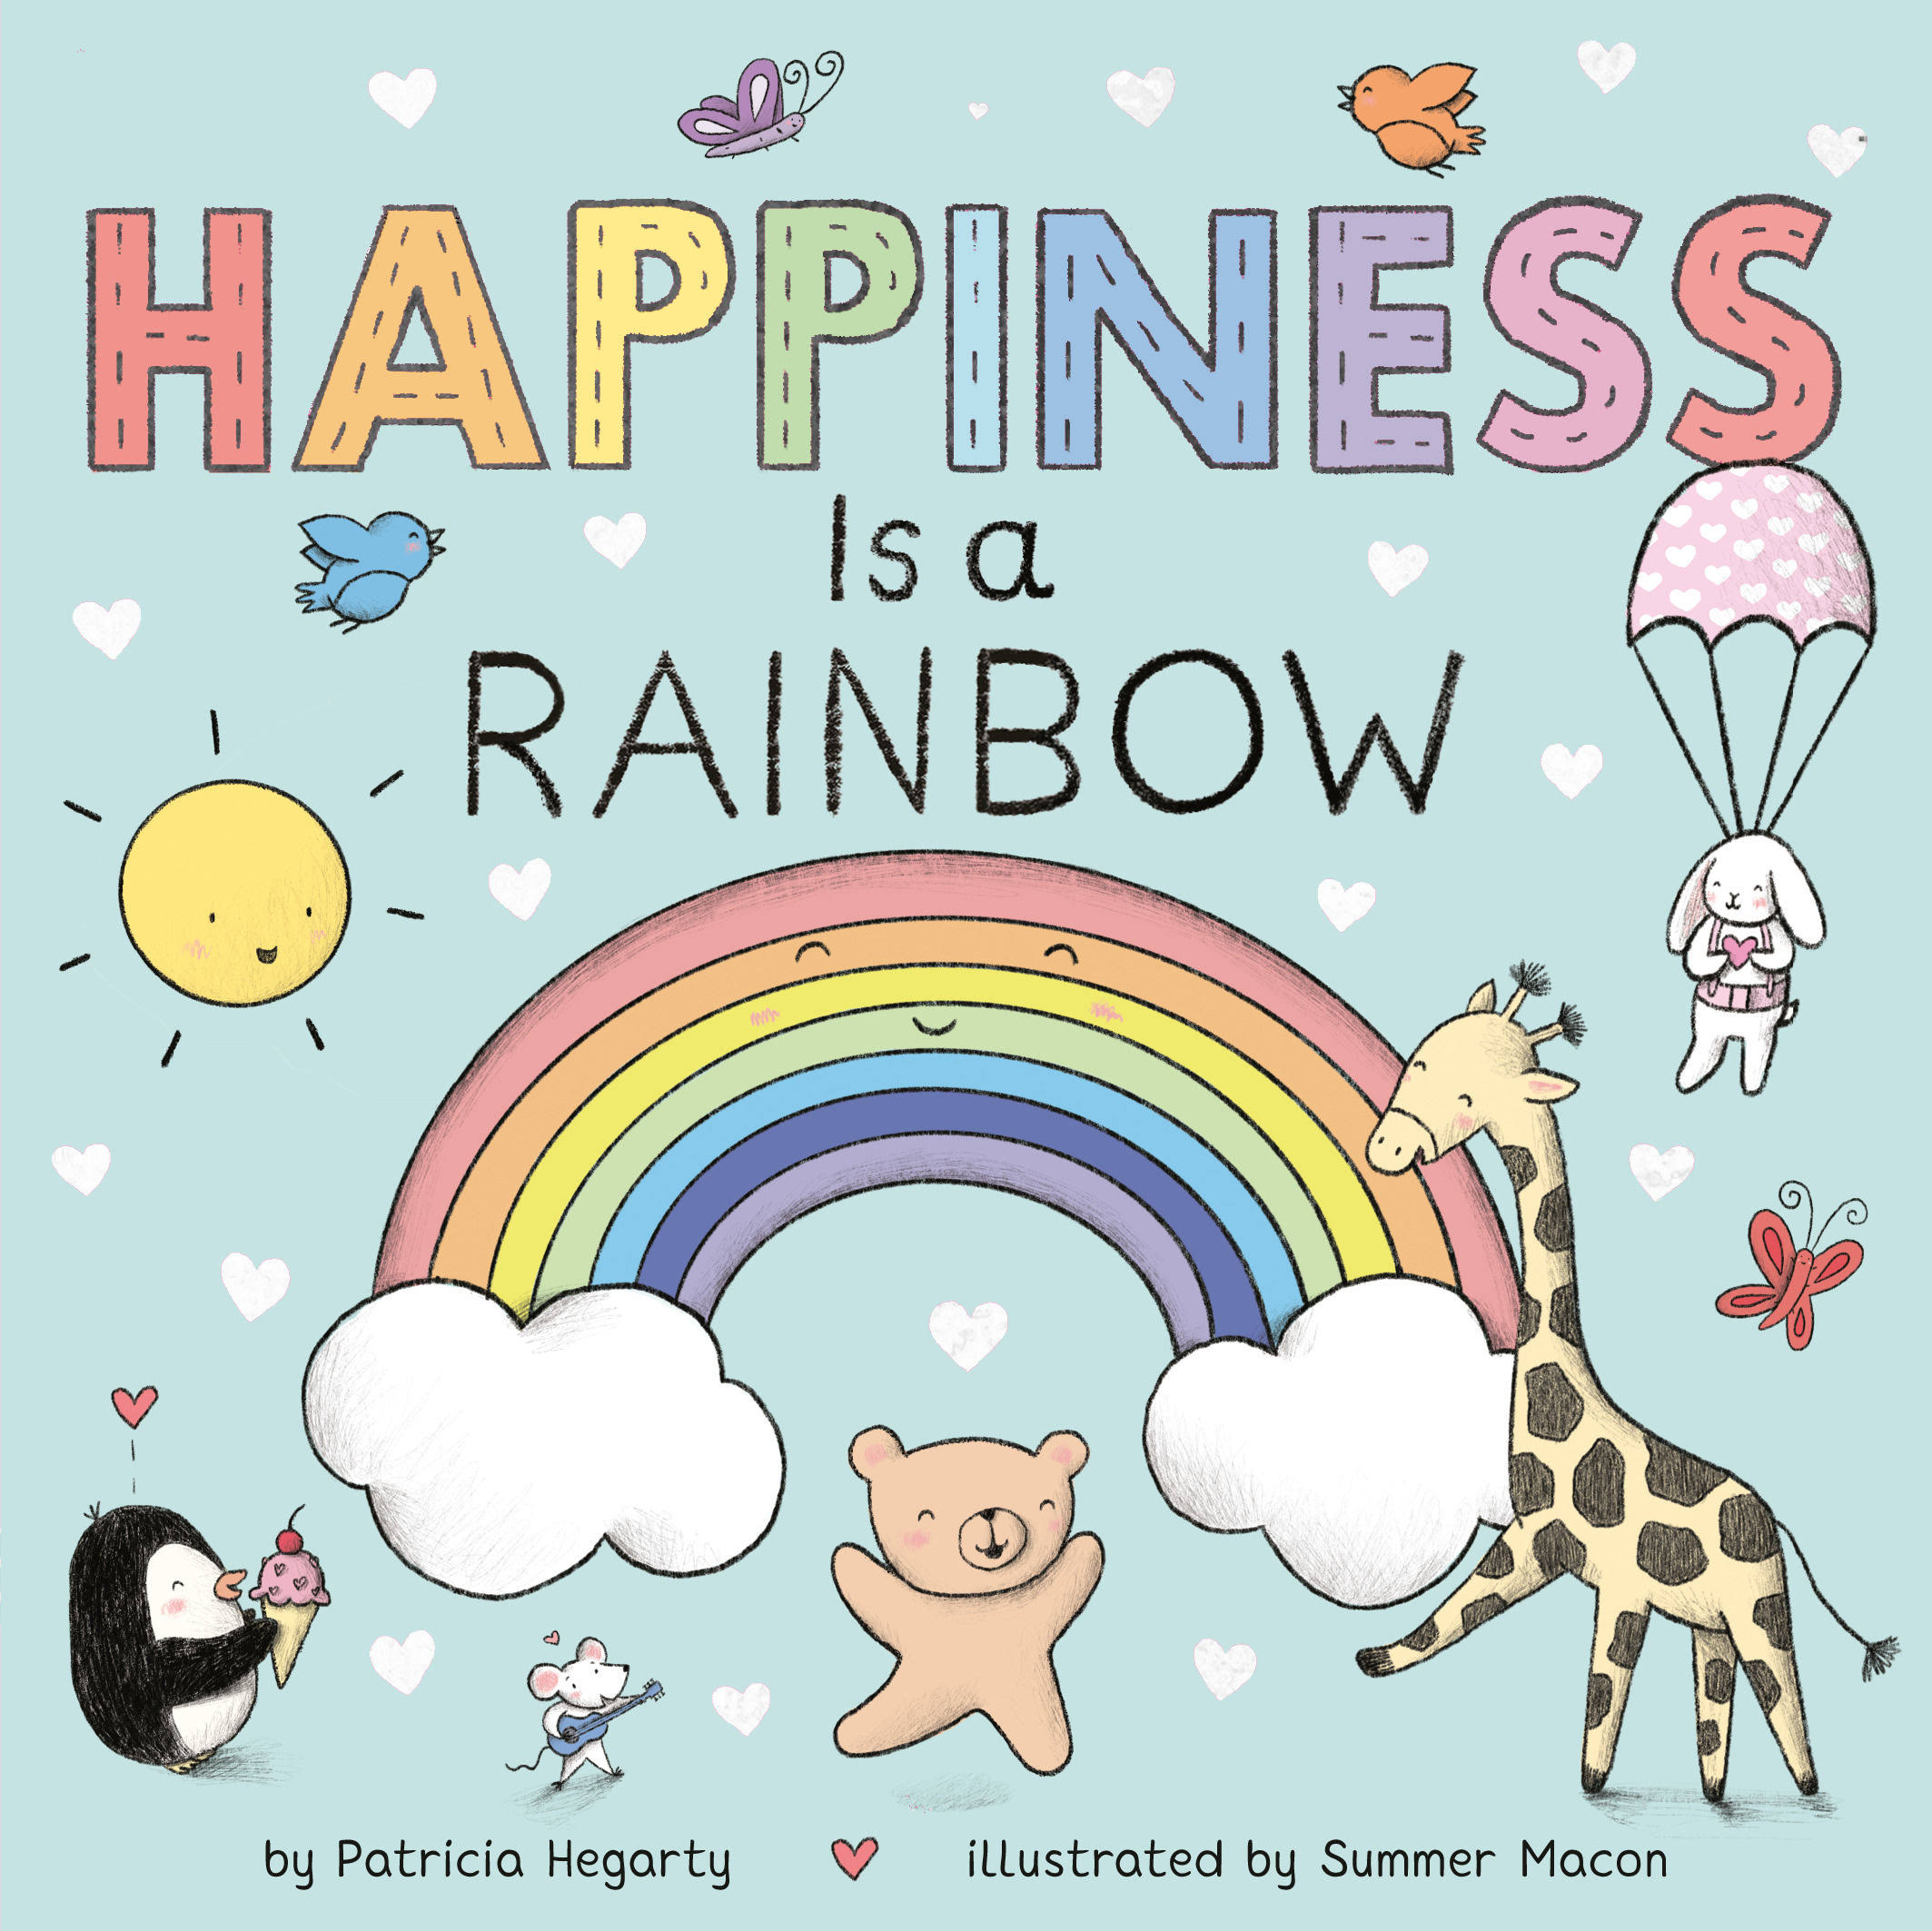 Happiness Is A Rainbow by Patricia Hegarty